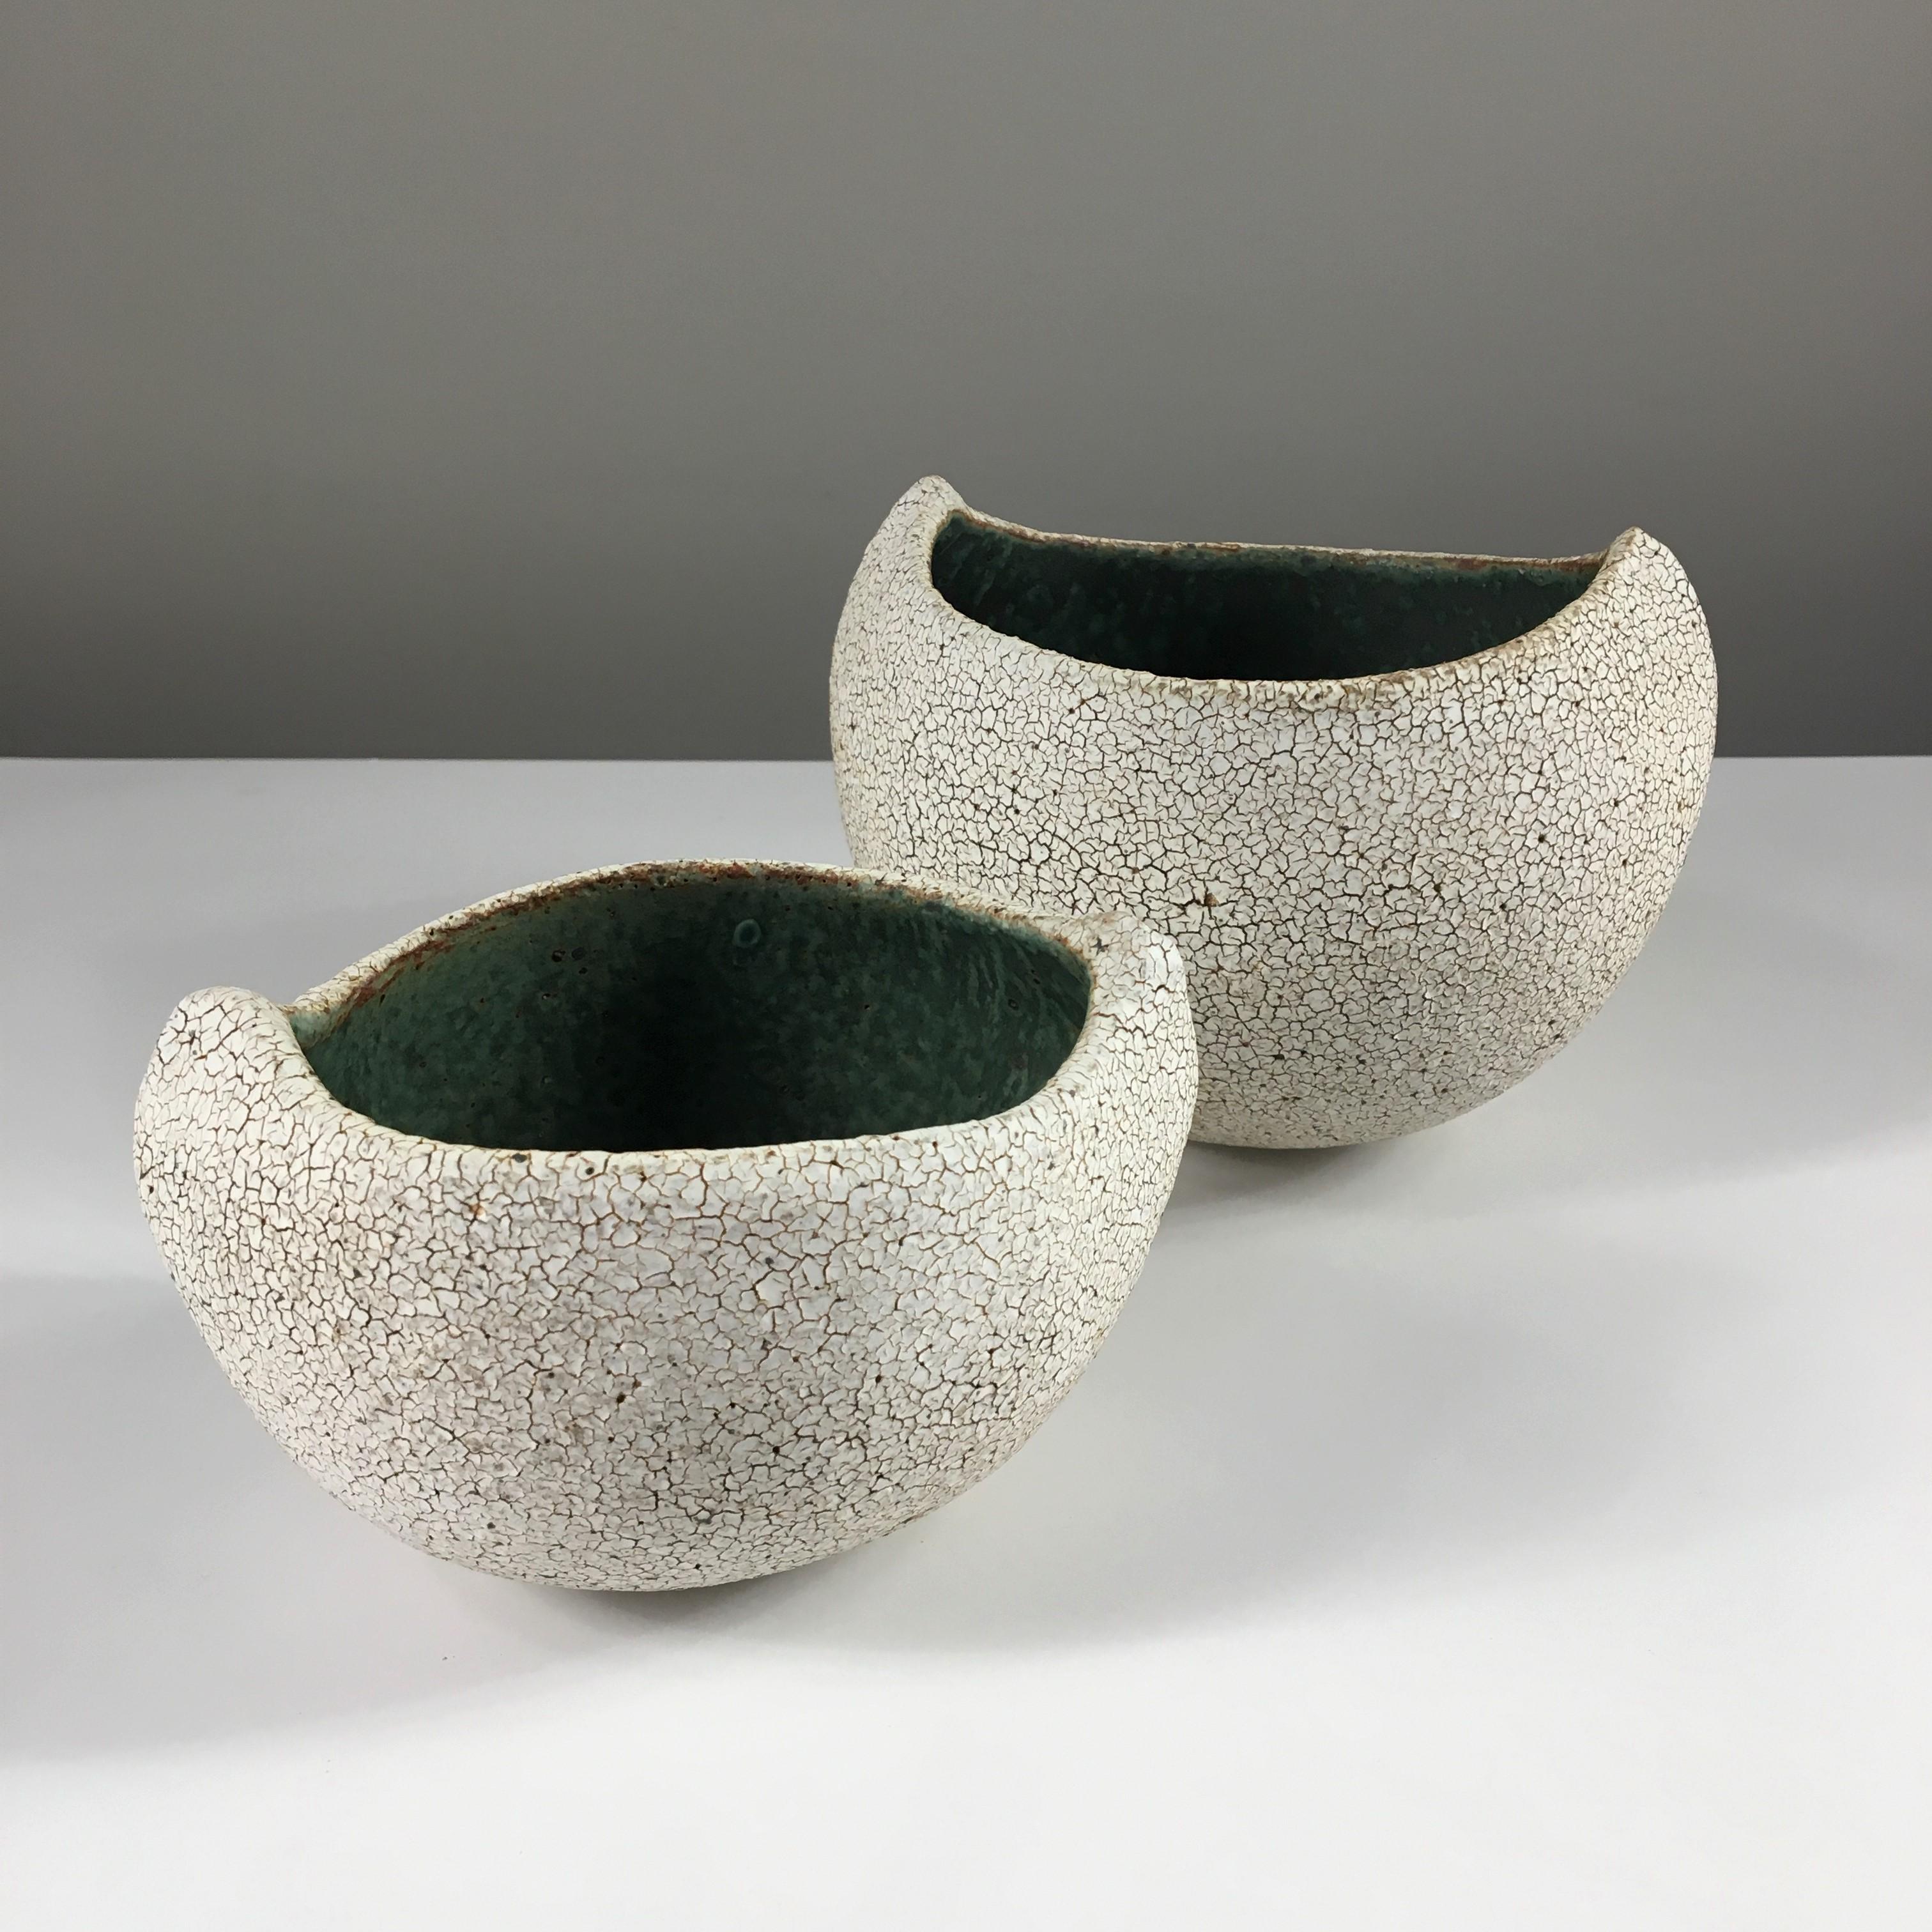 Set of 2 Boat Shaped Ceramic Bowls with Glaze by Yumiko Kuga. Dimensions: W 7